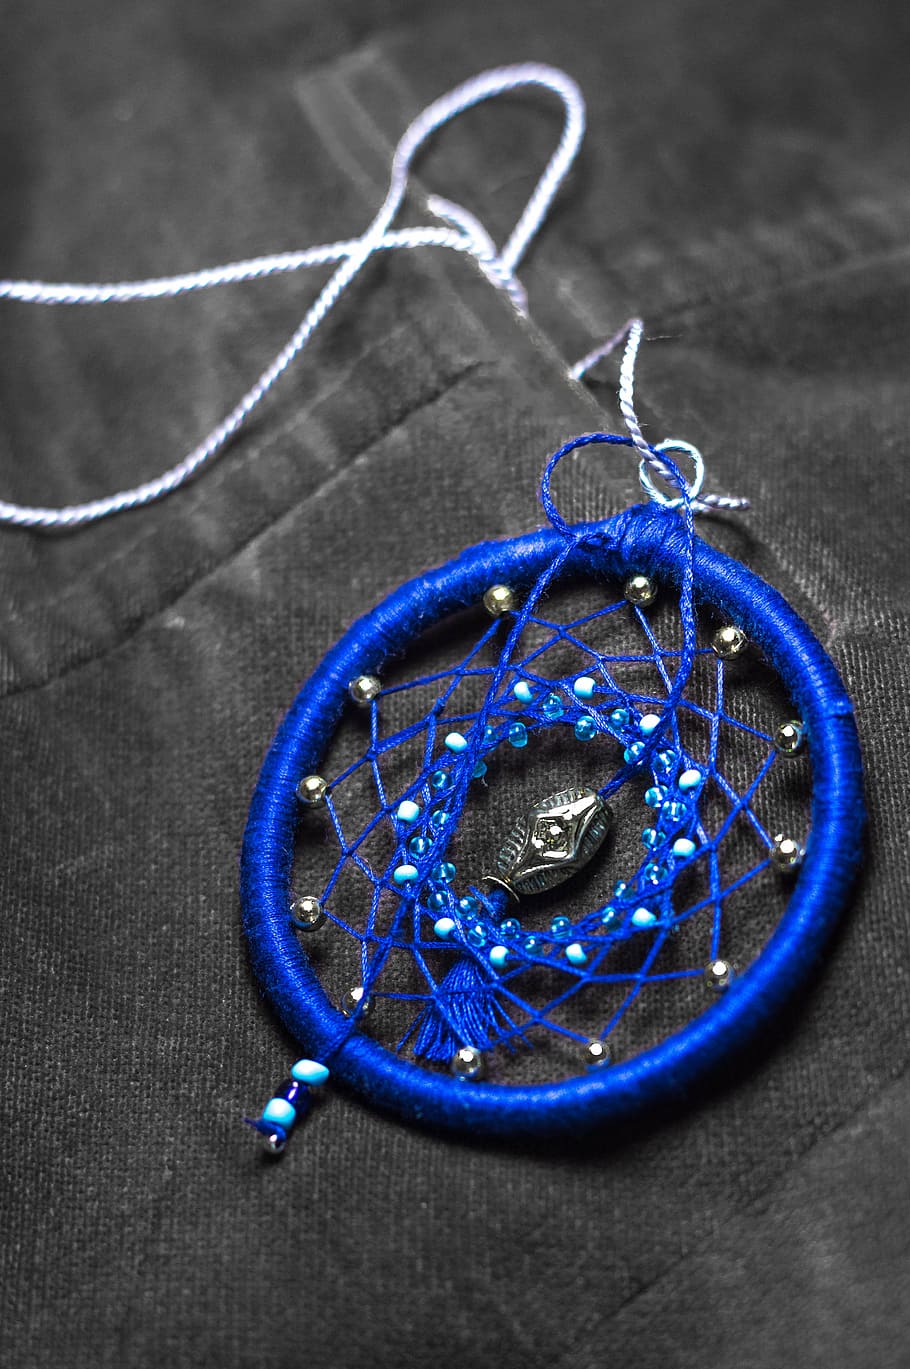 dream catcher, necklace, beads, fashion, jewelry, handcrafted, wires, apparel, artifacts, blue